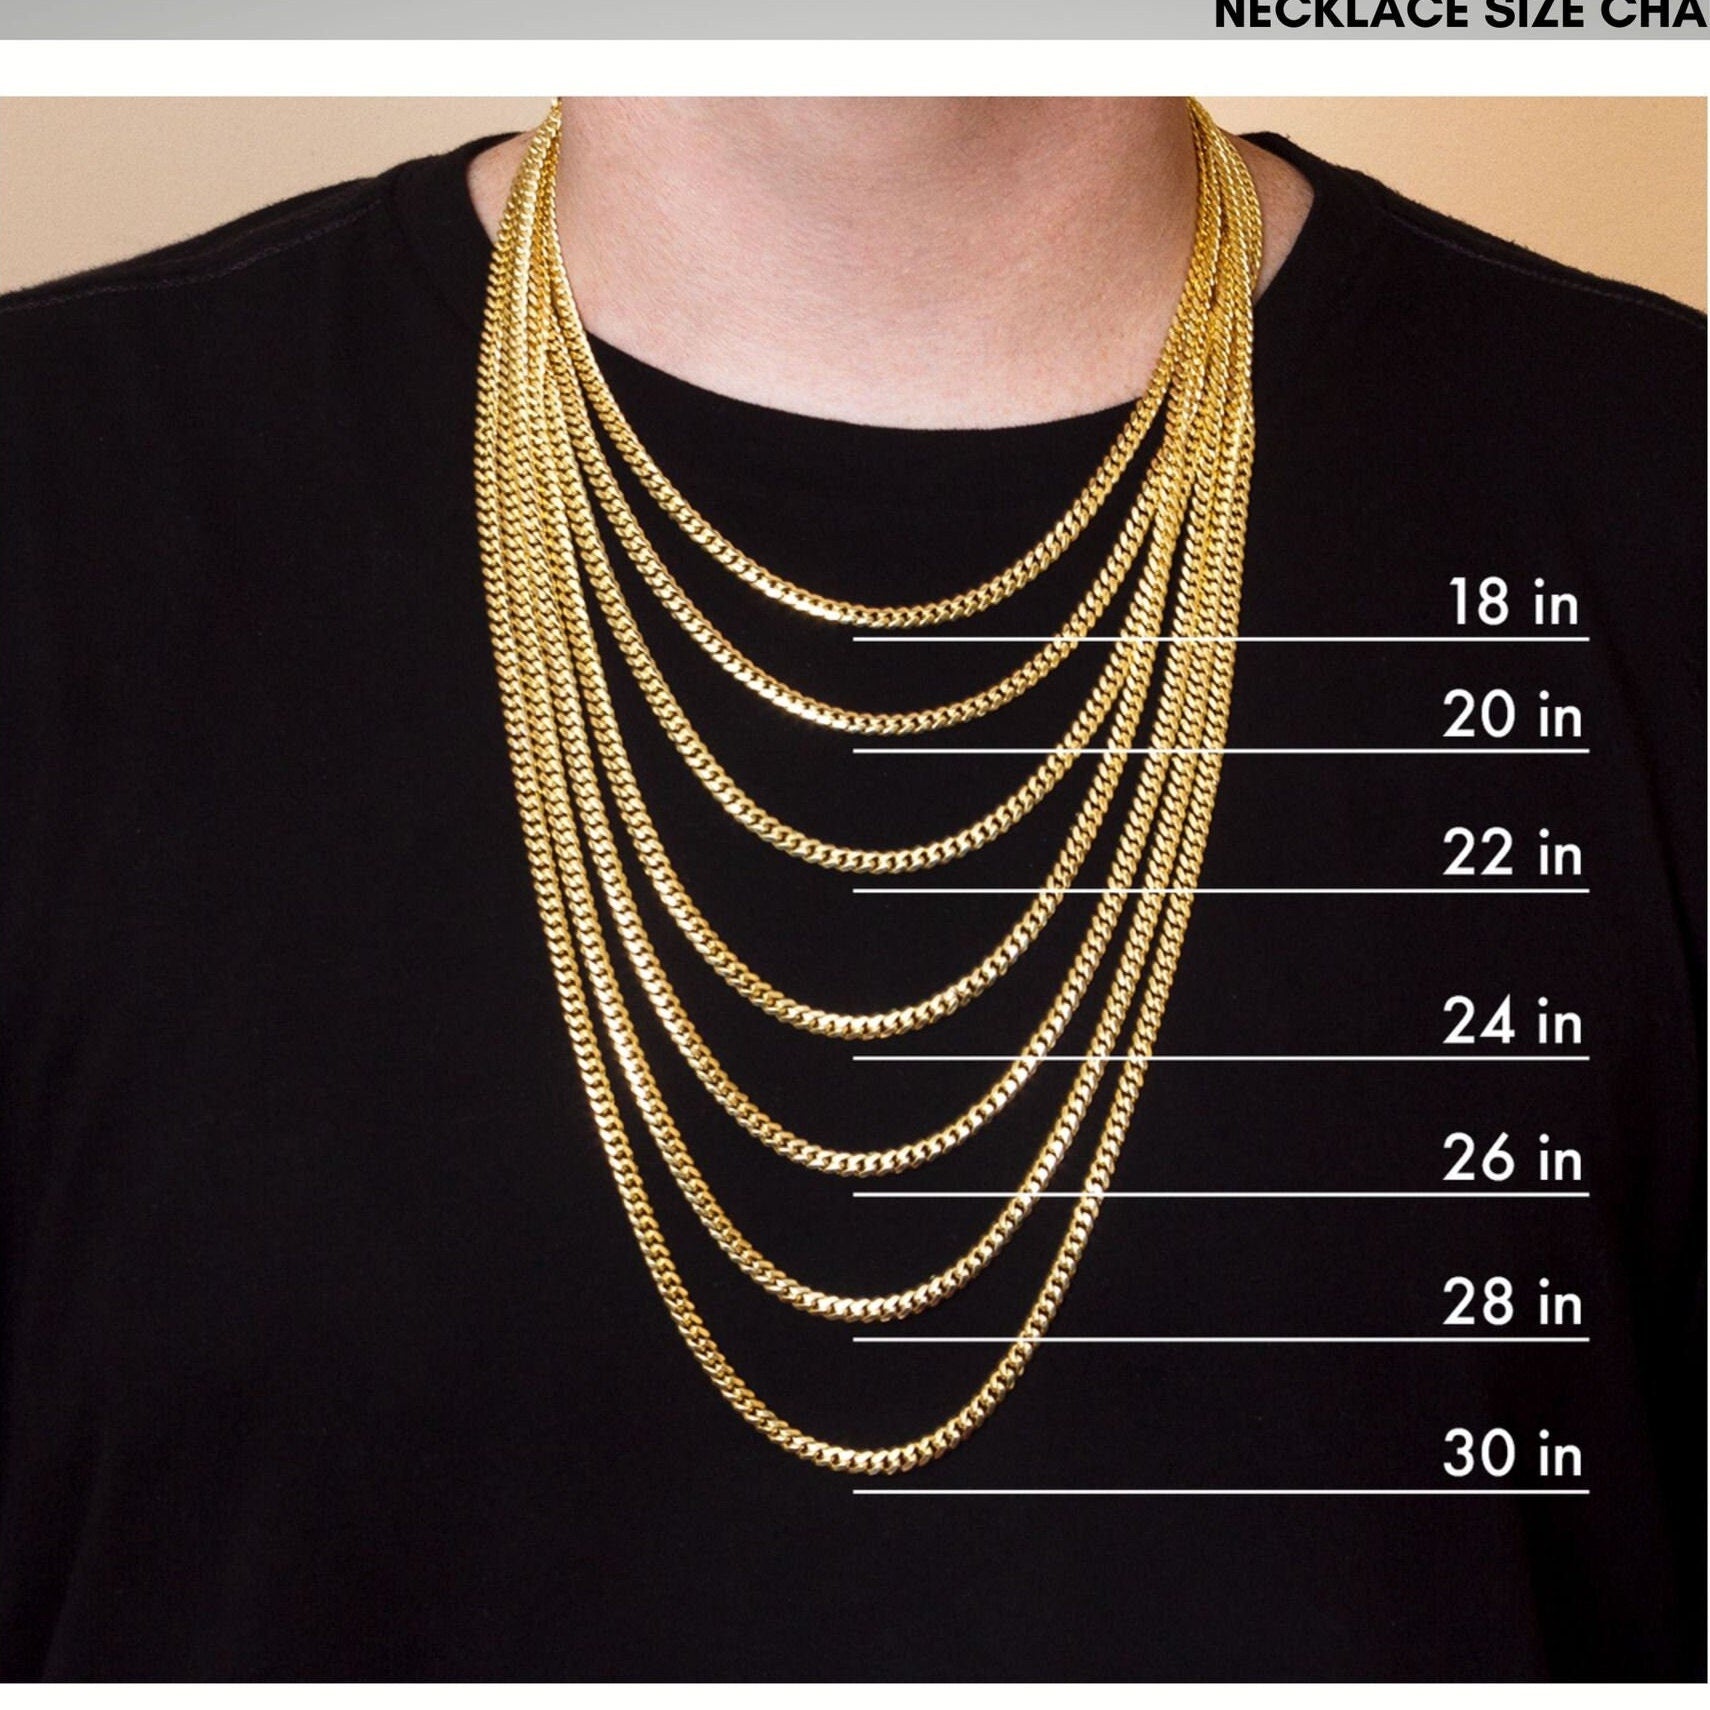 18k Gold Filled 6mm Thickness Mariner Anchor Link Chain Necklaces for Wholesale Jewelry Making Supplies